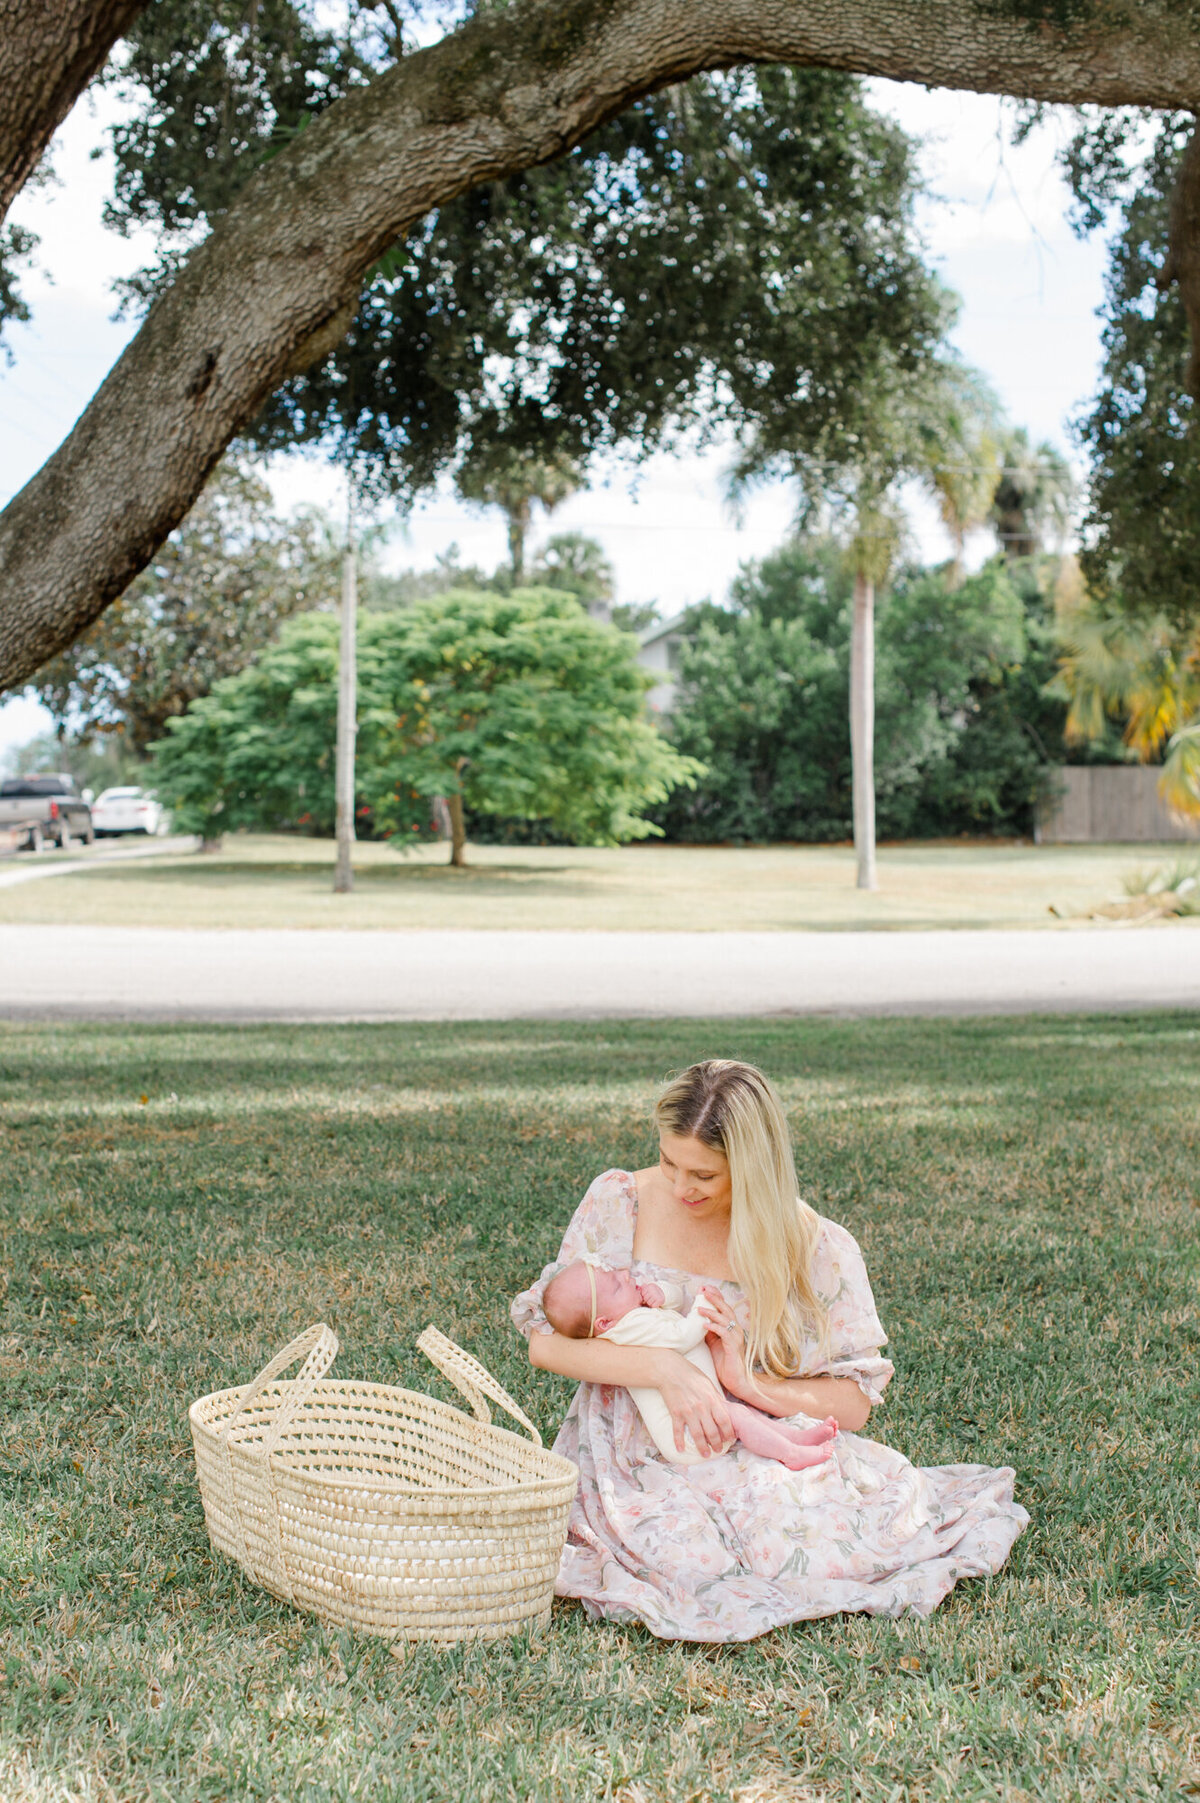 Orlando Newborn photographer captures a beautiful new mom sitting in the grass holding her baby next to a moses basket